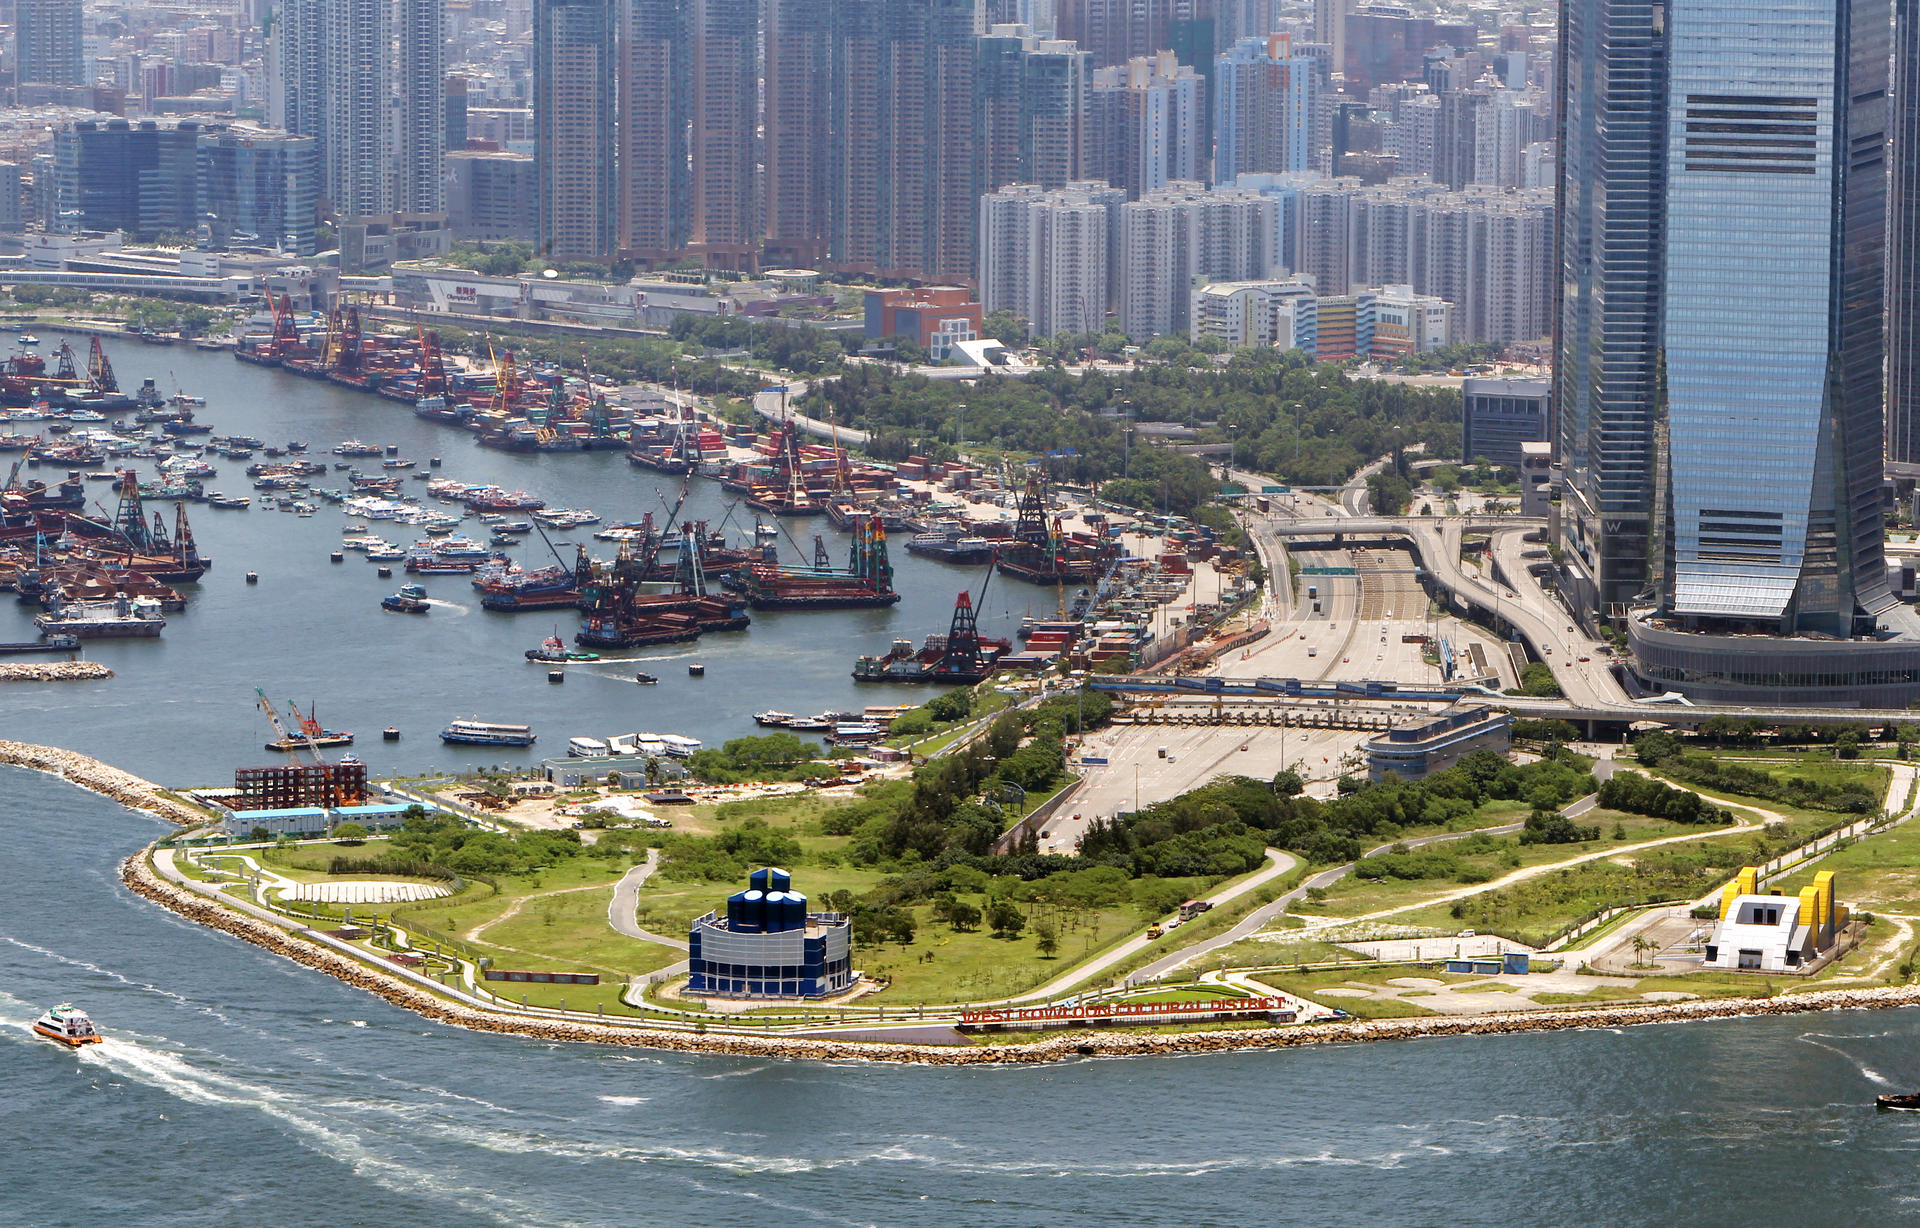 The site of the West Kowloon Cultural District. Photo: SCMP